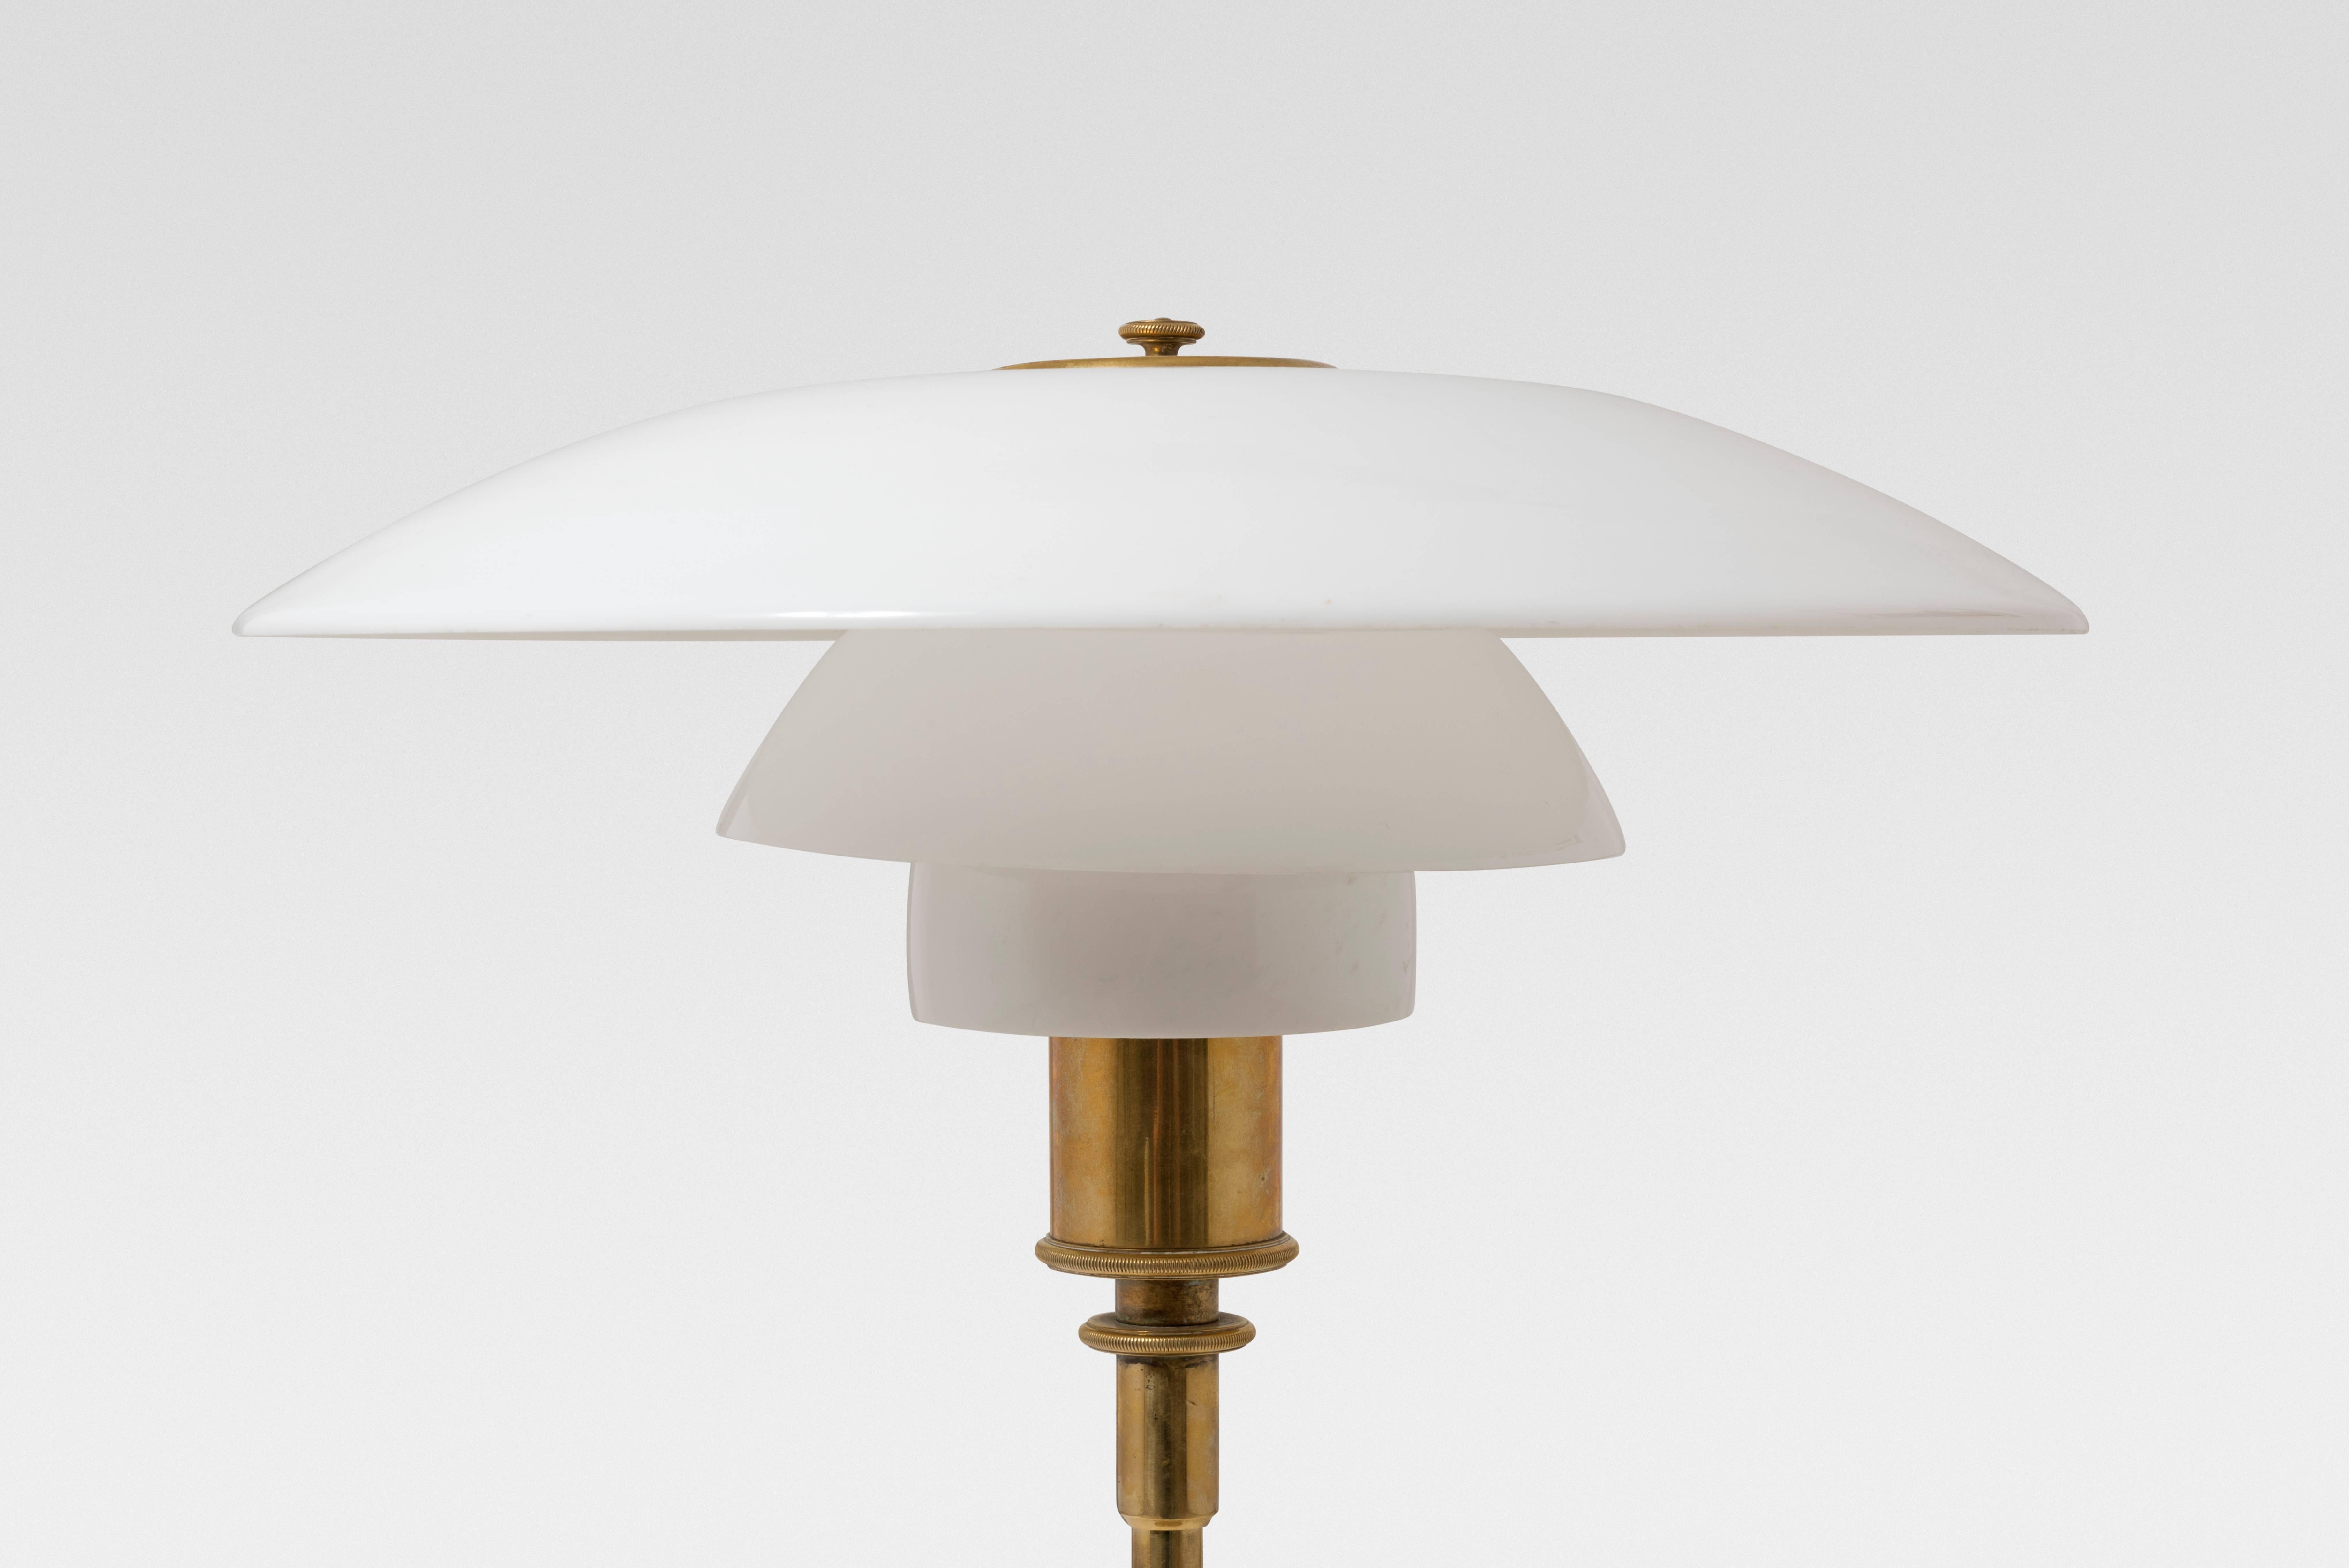 Poul Henningsen (1894-1967)
Table lamp PH 4
Manufactured by Louis Poulsen
circa 1930
Opaline glass and brass

Literature: 
Louis Poulsen, Tina Jorstian, "Light Years Ahead" - The story of the PH Lamp", édition Poul Erik Munk